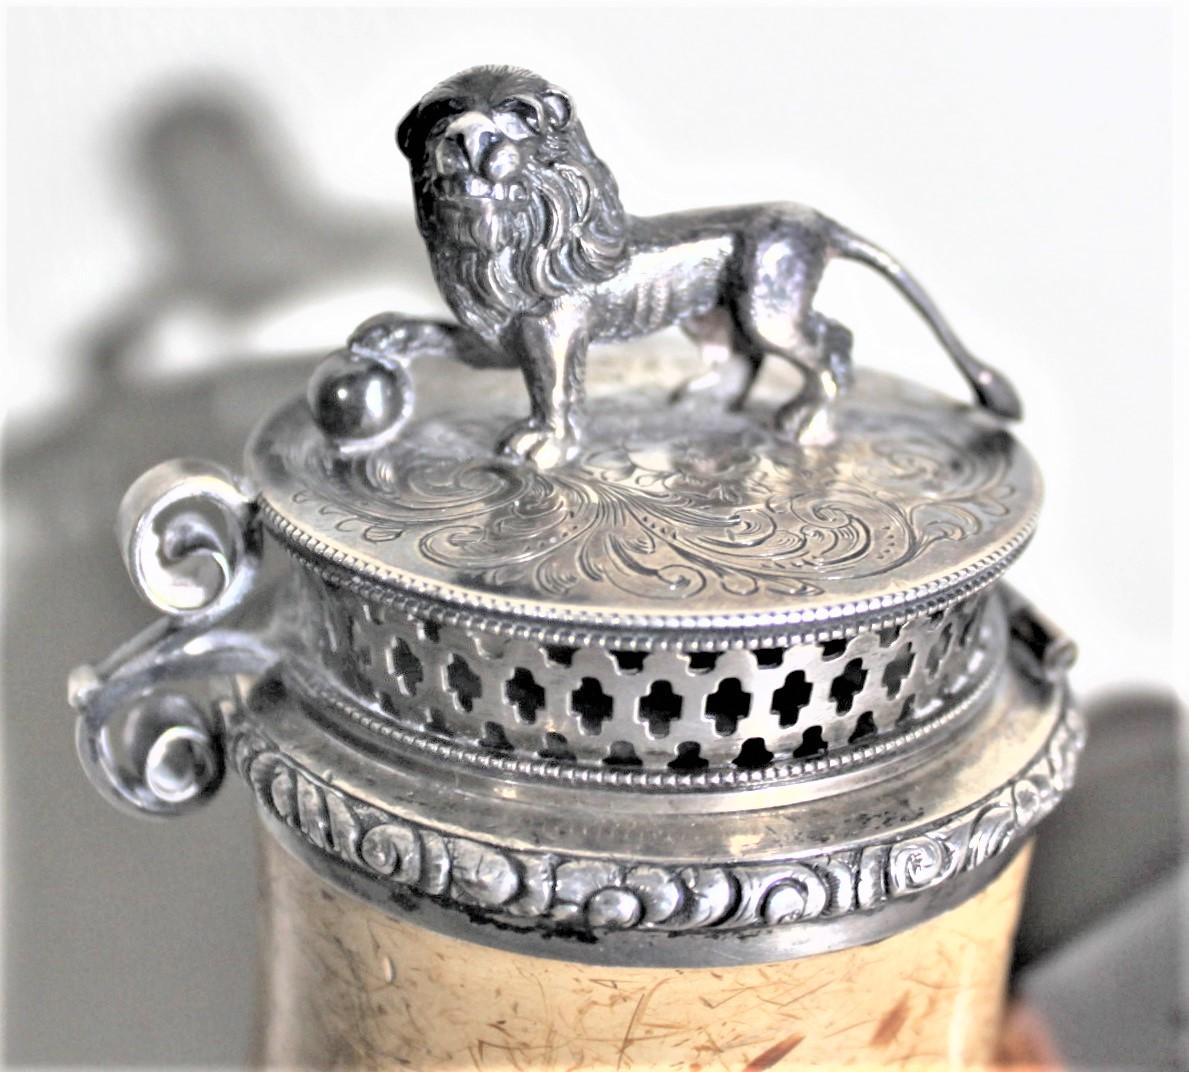 20th Century Antique Meerschaum Smoking Pipe with Silver Figural Standing Lion Top & Mounts For Sale